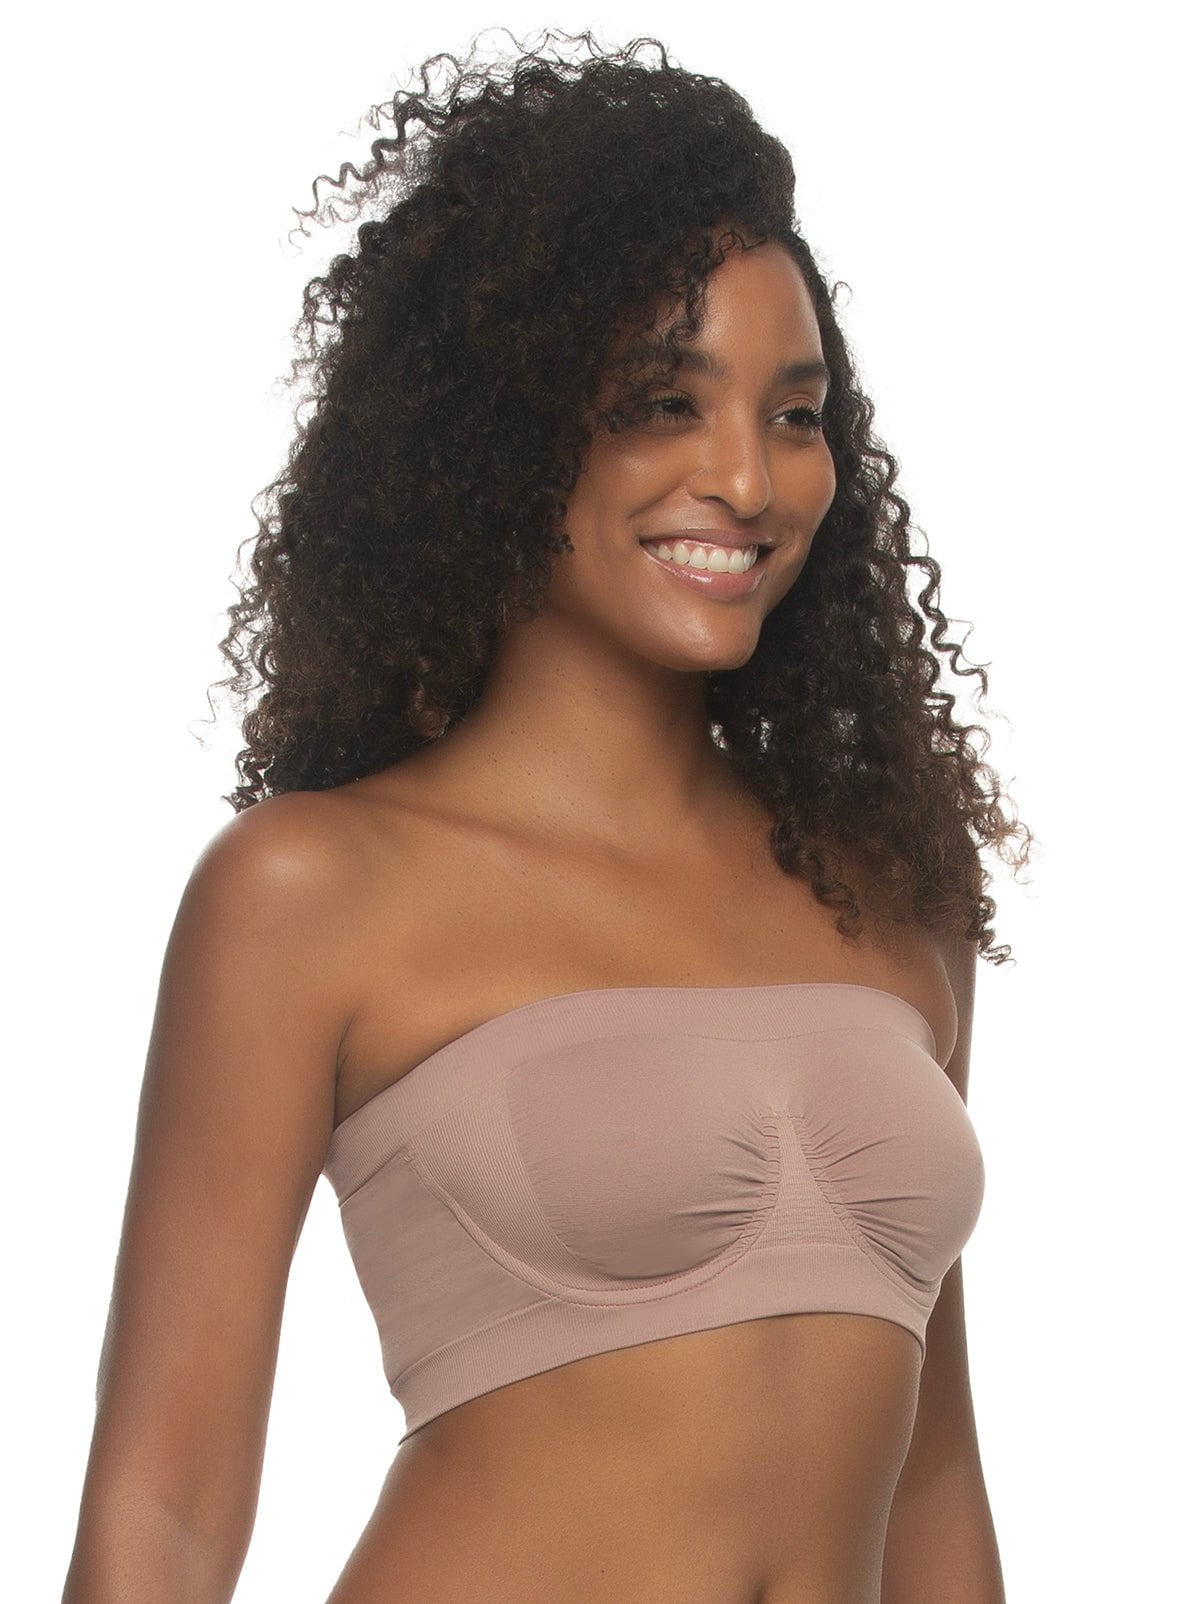 Women's Strapless Bandeau Bras Unlined Underwire Seamless Plus Size Comfort  Smooth Bra